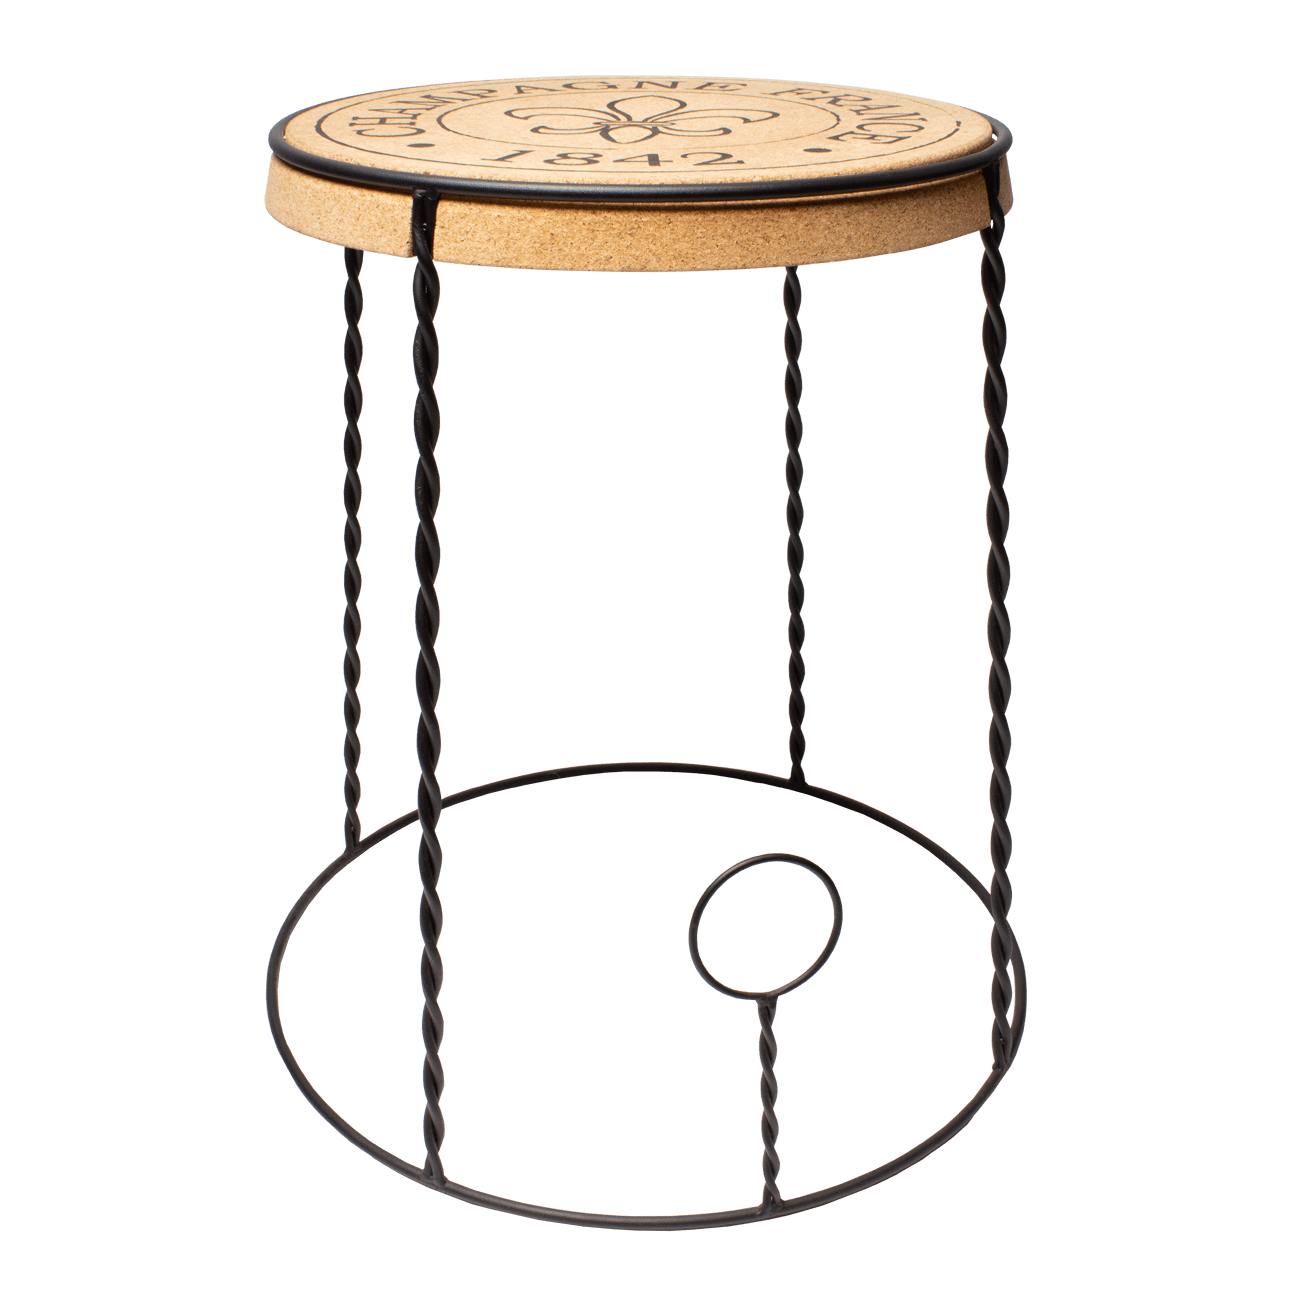 Side view of a metal and cork table showing the twisted messal legs of the table's base to look like a champagne cage.